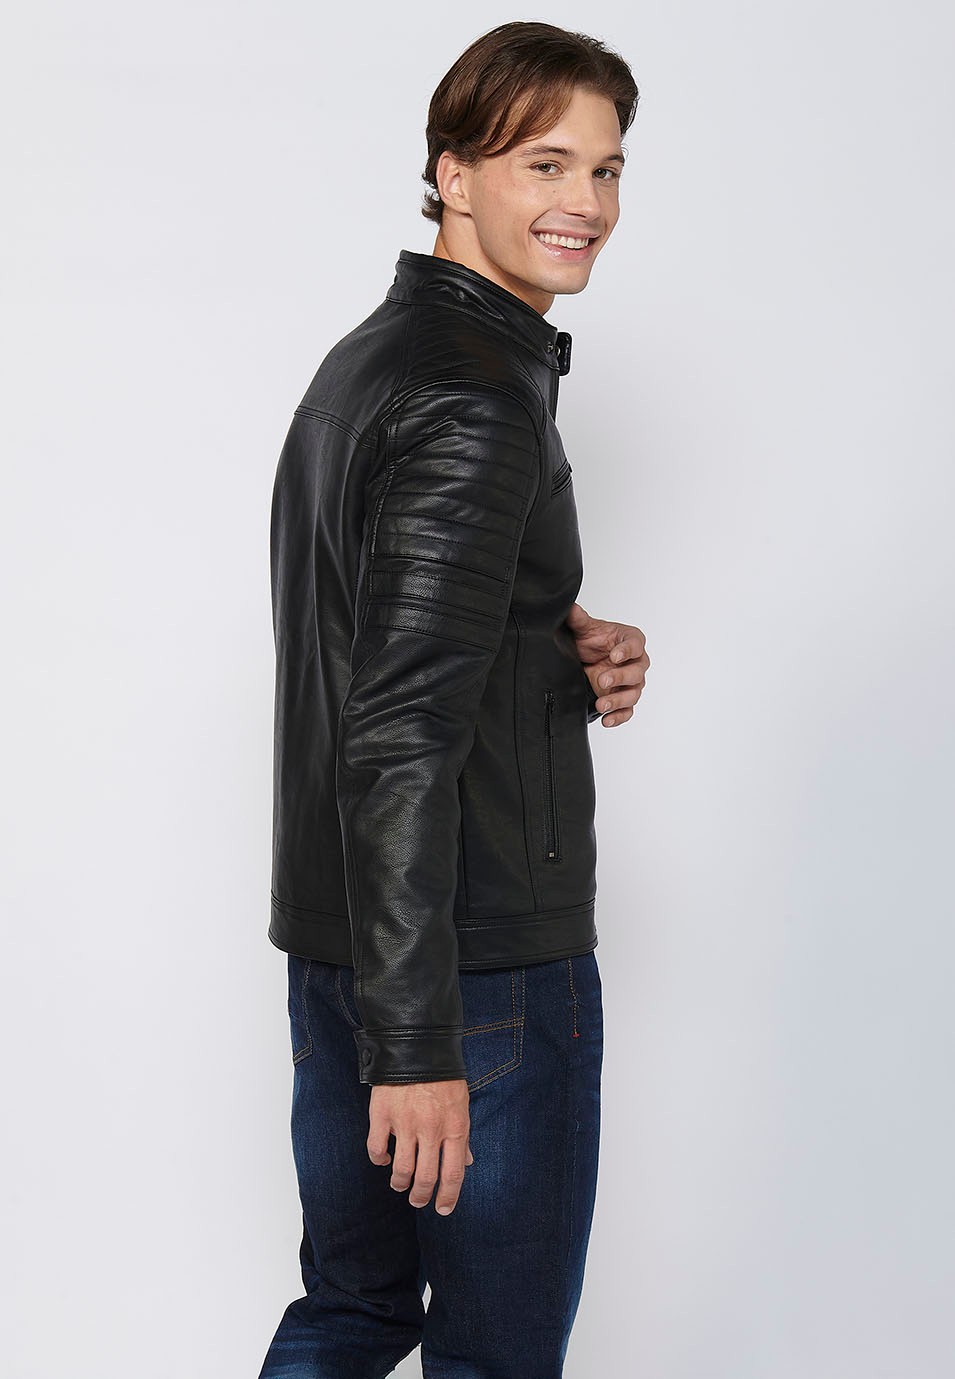 Long-sleeved jacket with round neck and details on the shoulders and arms in Black for Men